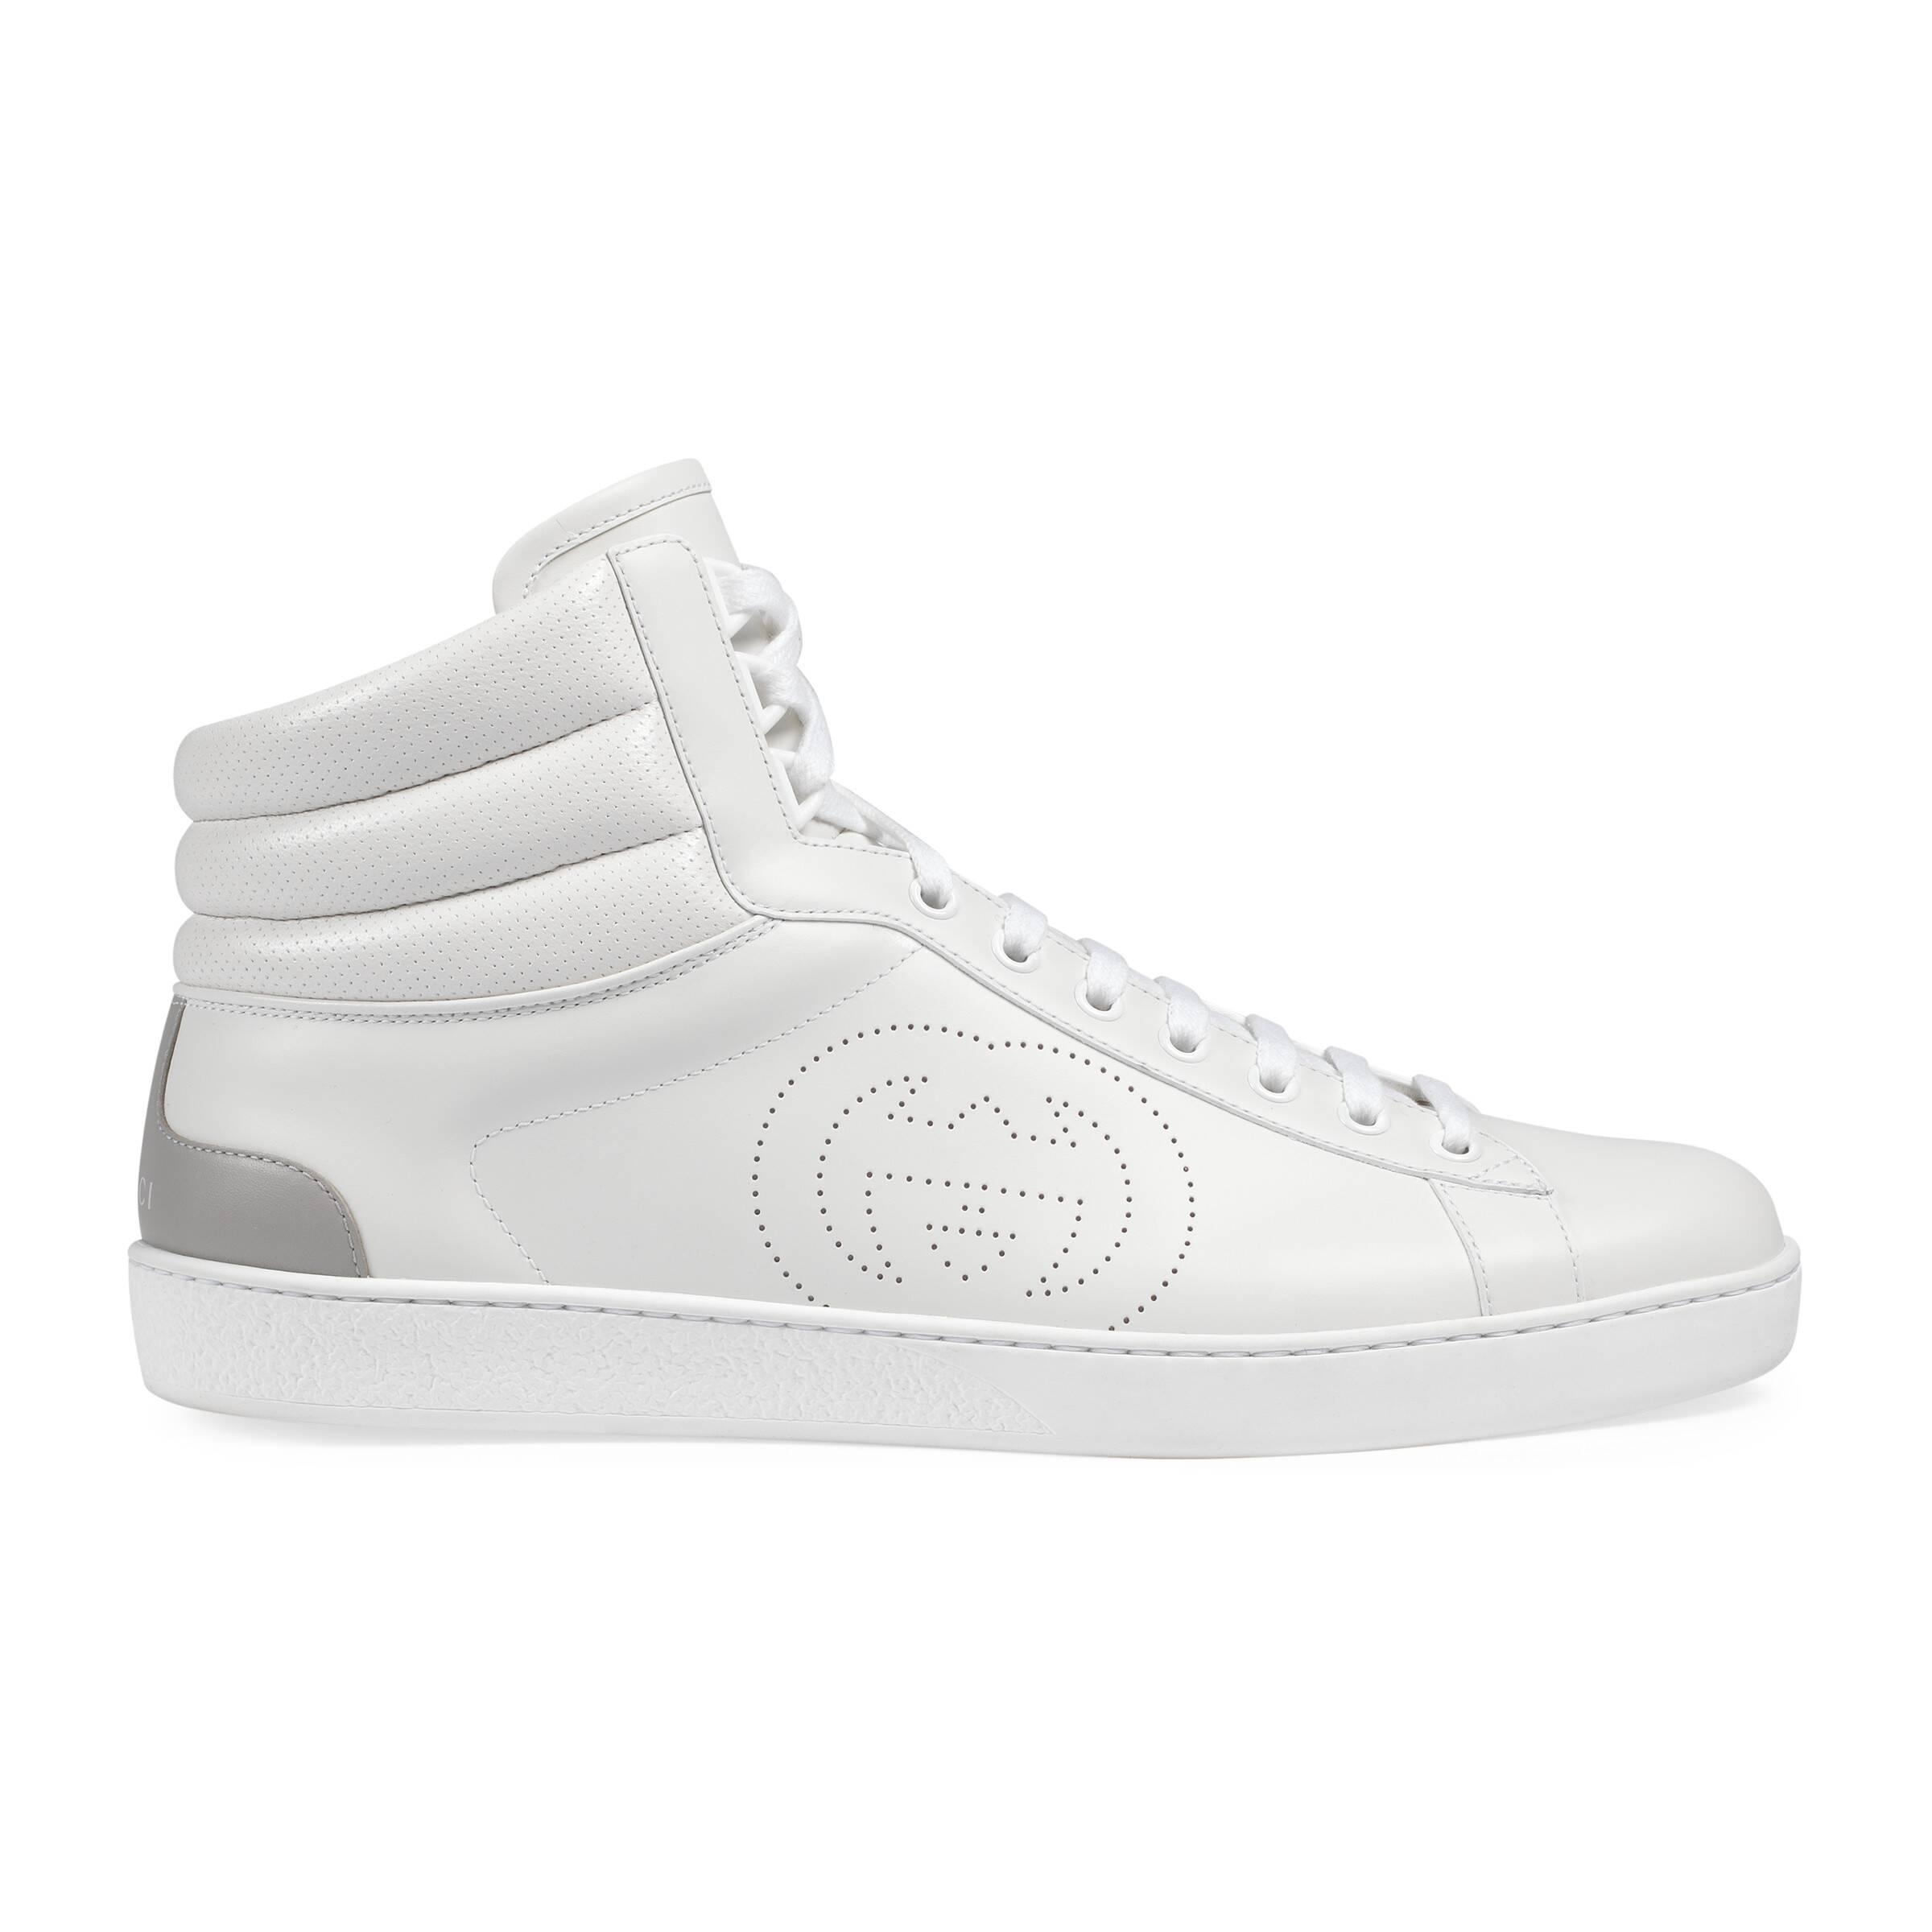 Gucci High-top Ace Sneaker in White for Men - Lyst